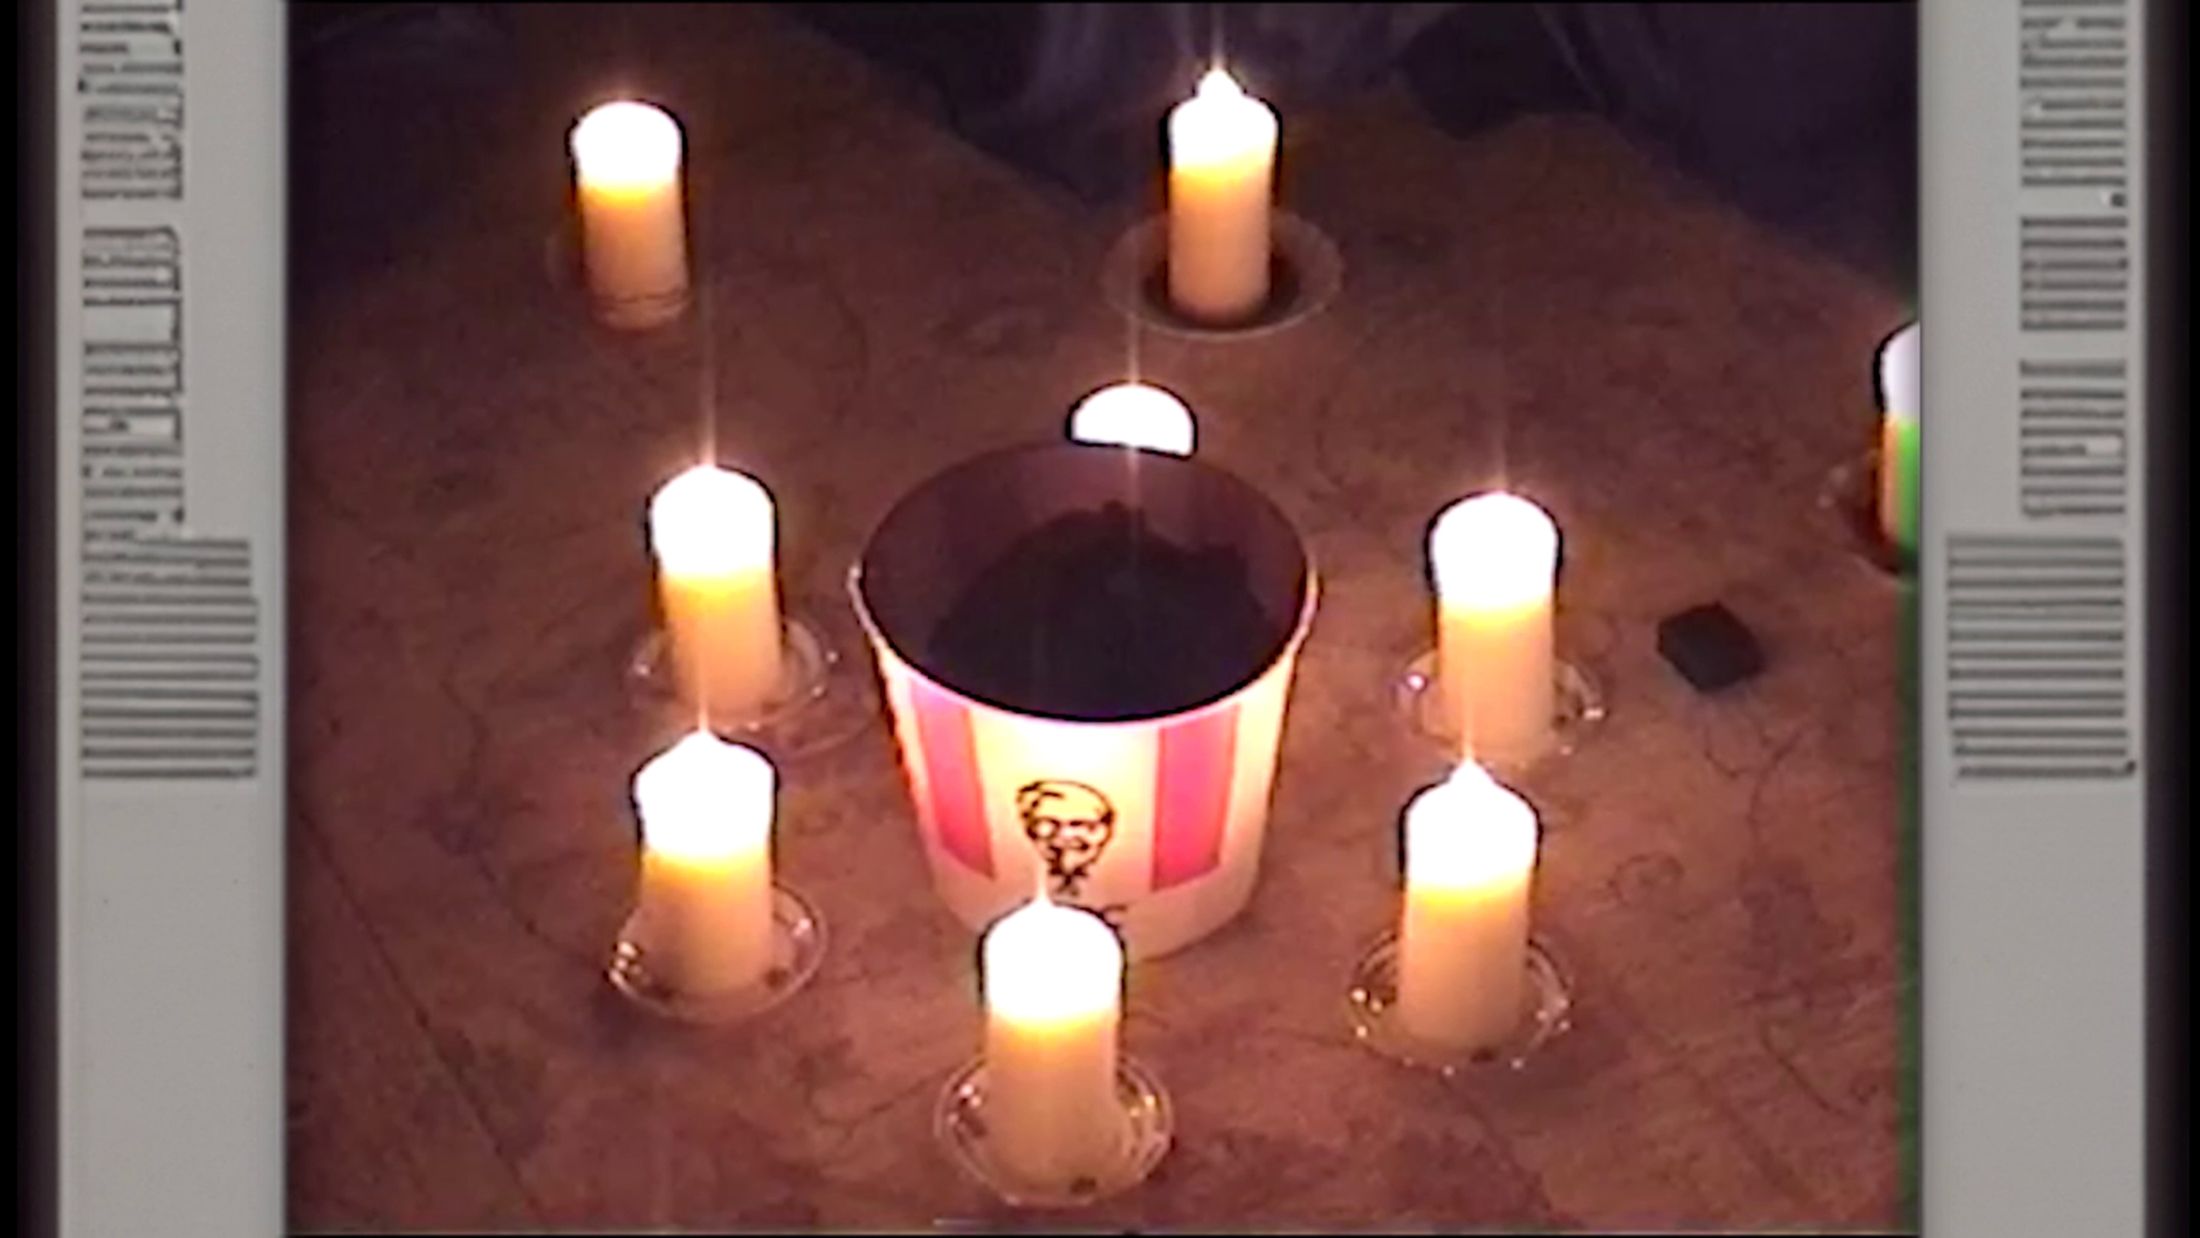 Still from DreamArena (2024) by Melle Nieling, a bucket of KFC surrounded by a ring of candles